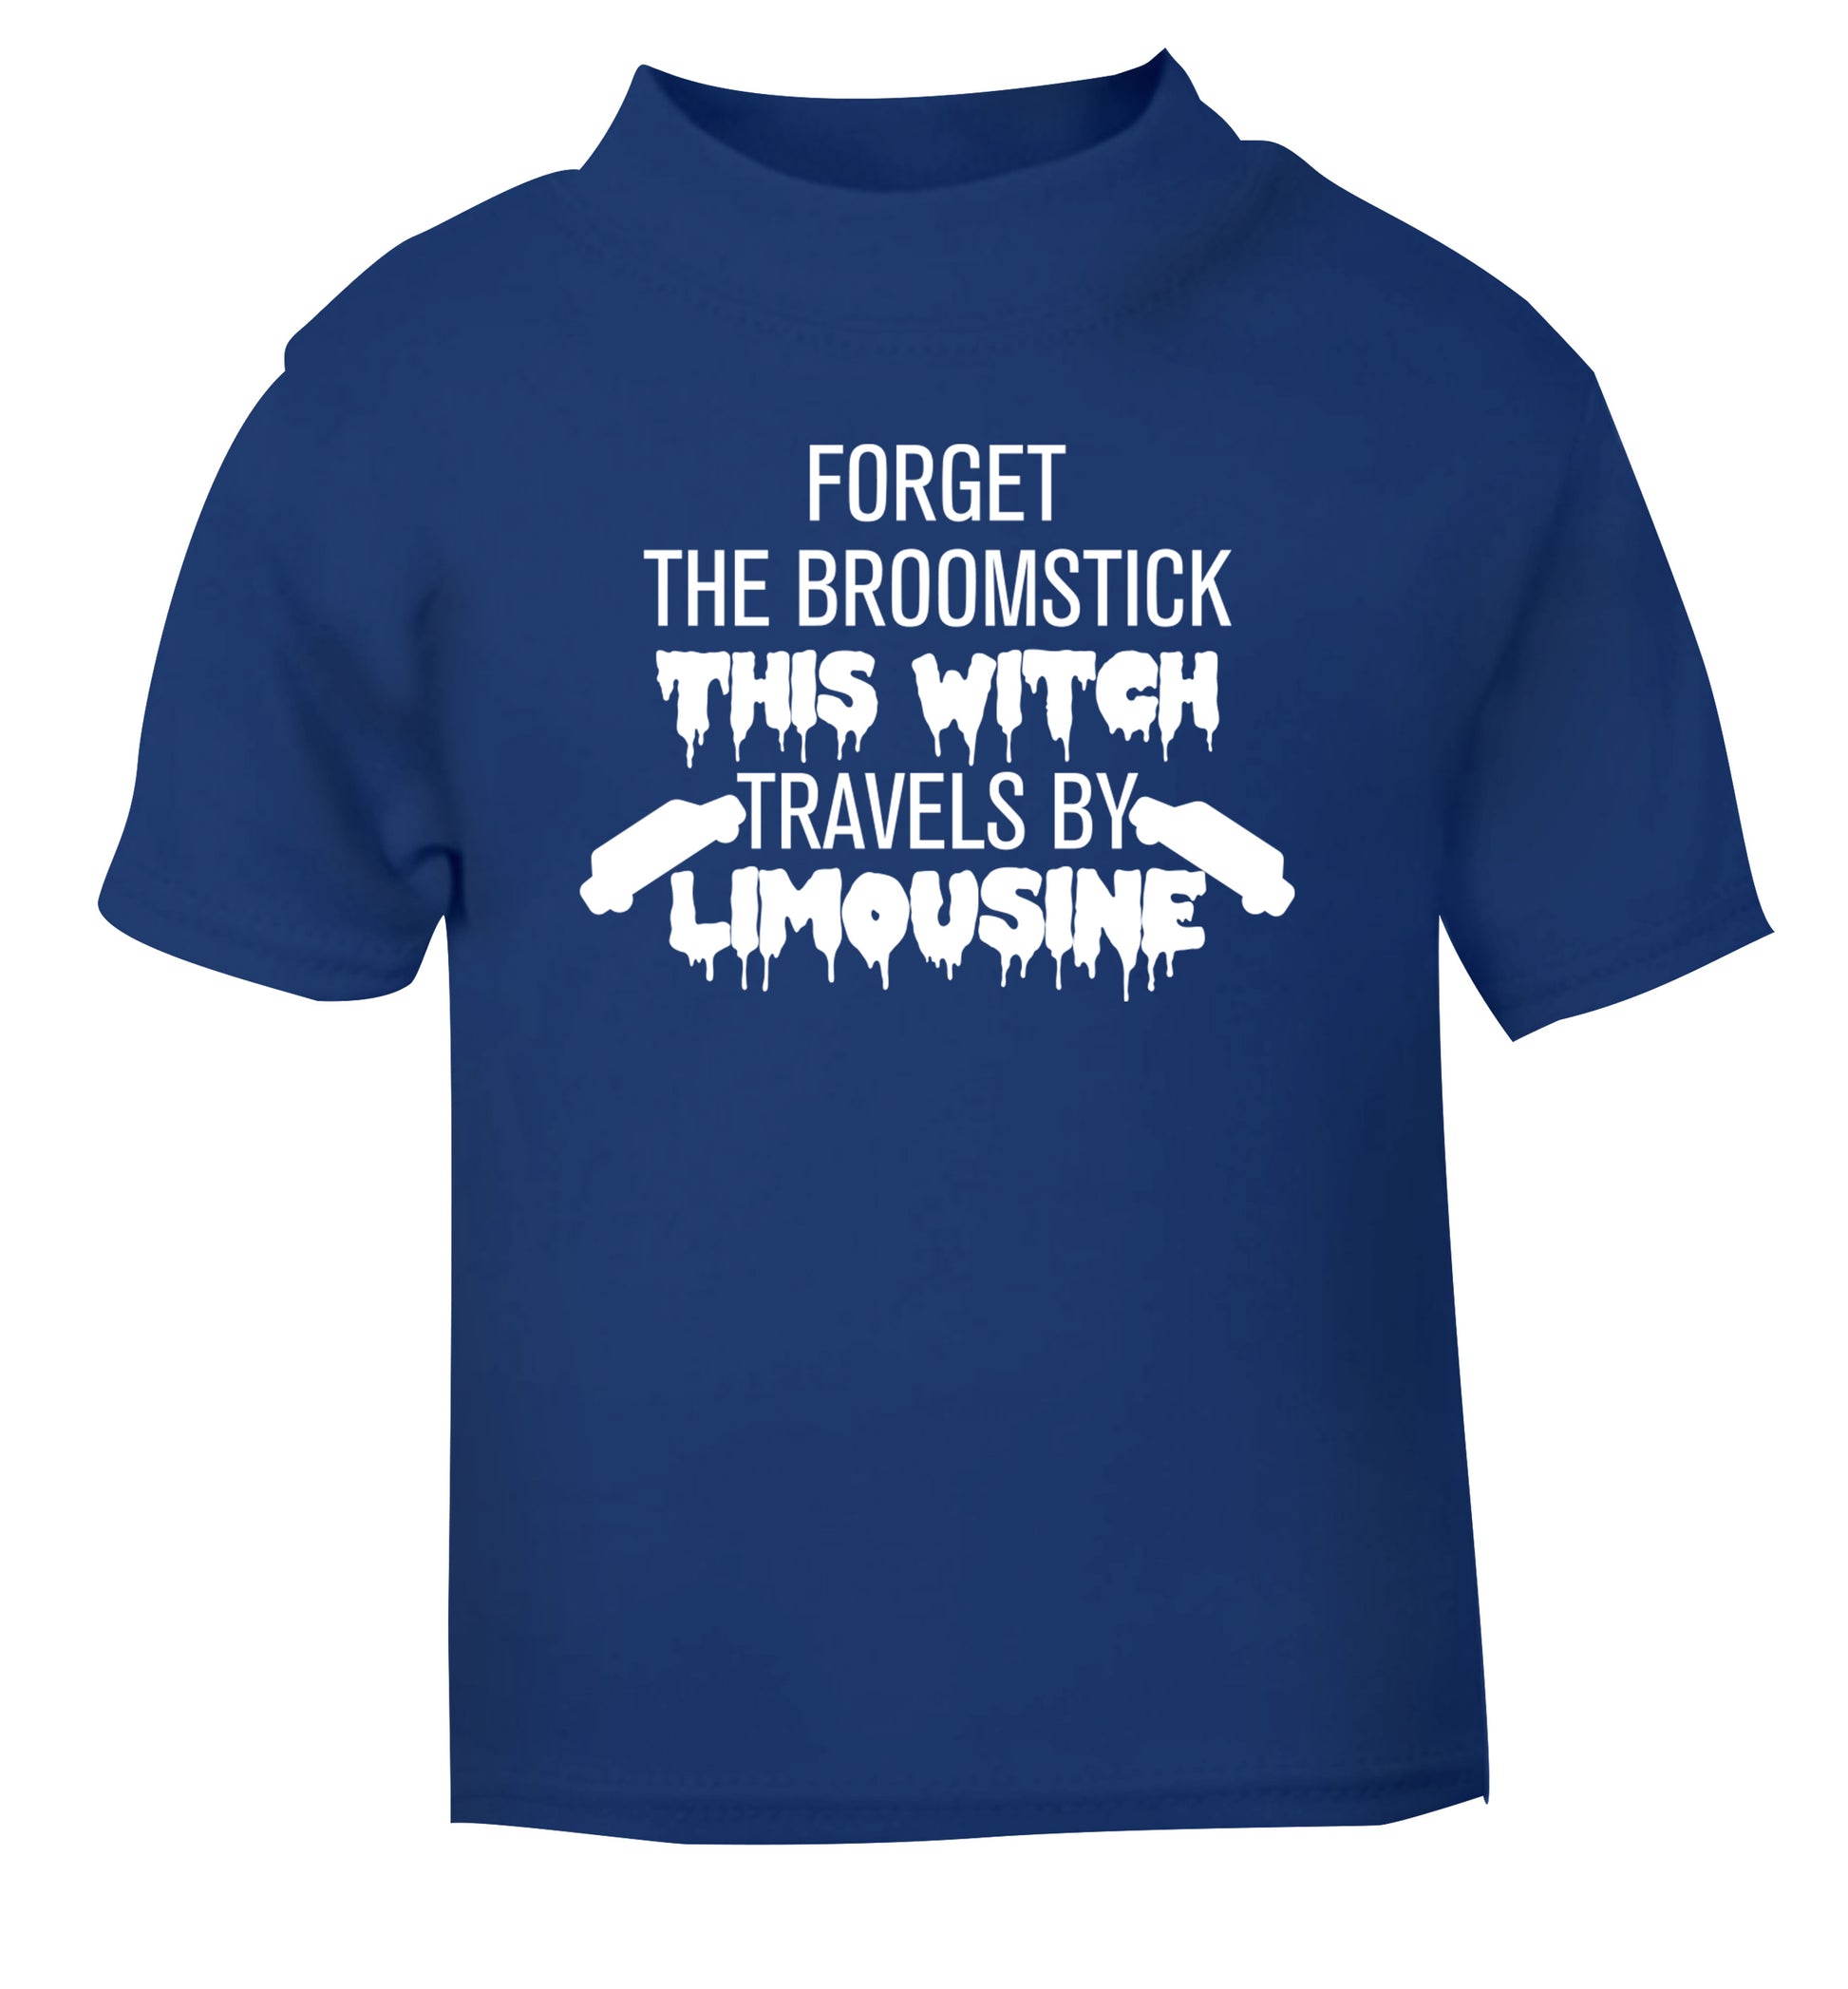 Forget the broomstick this witch travels by limousine blue Baby Toddler Tshirt 2 Years